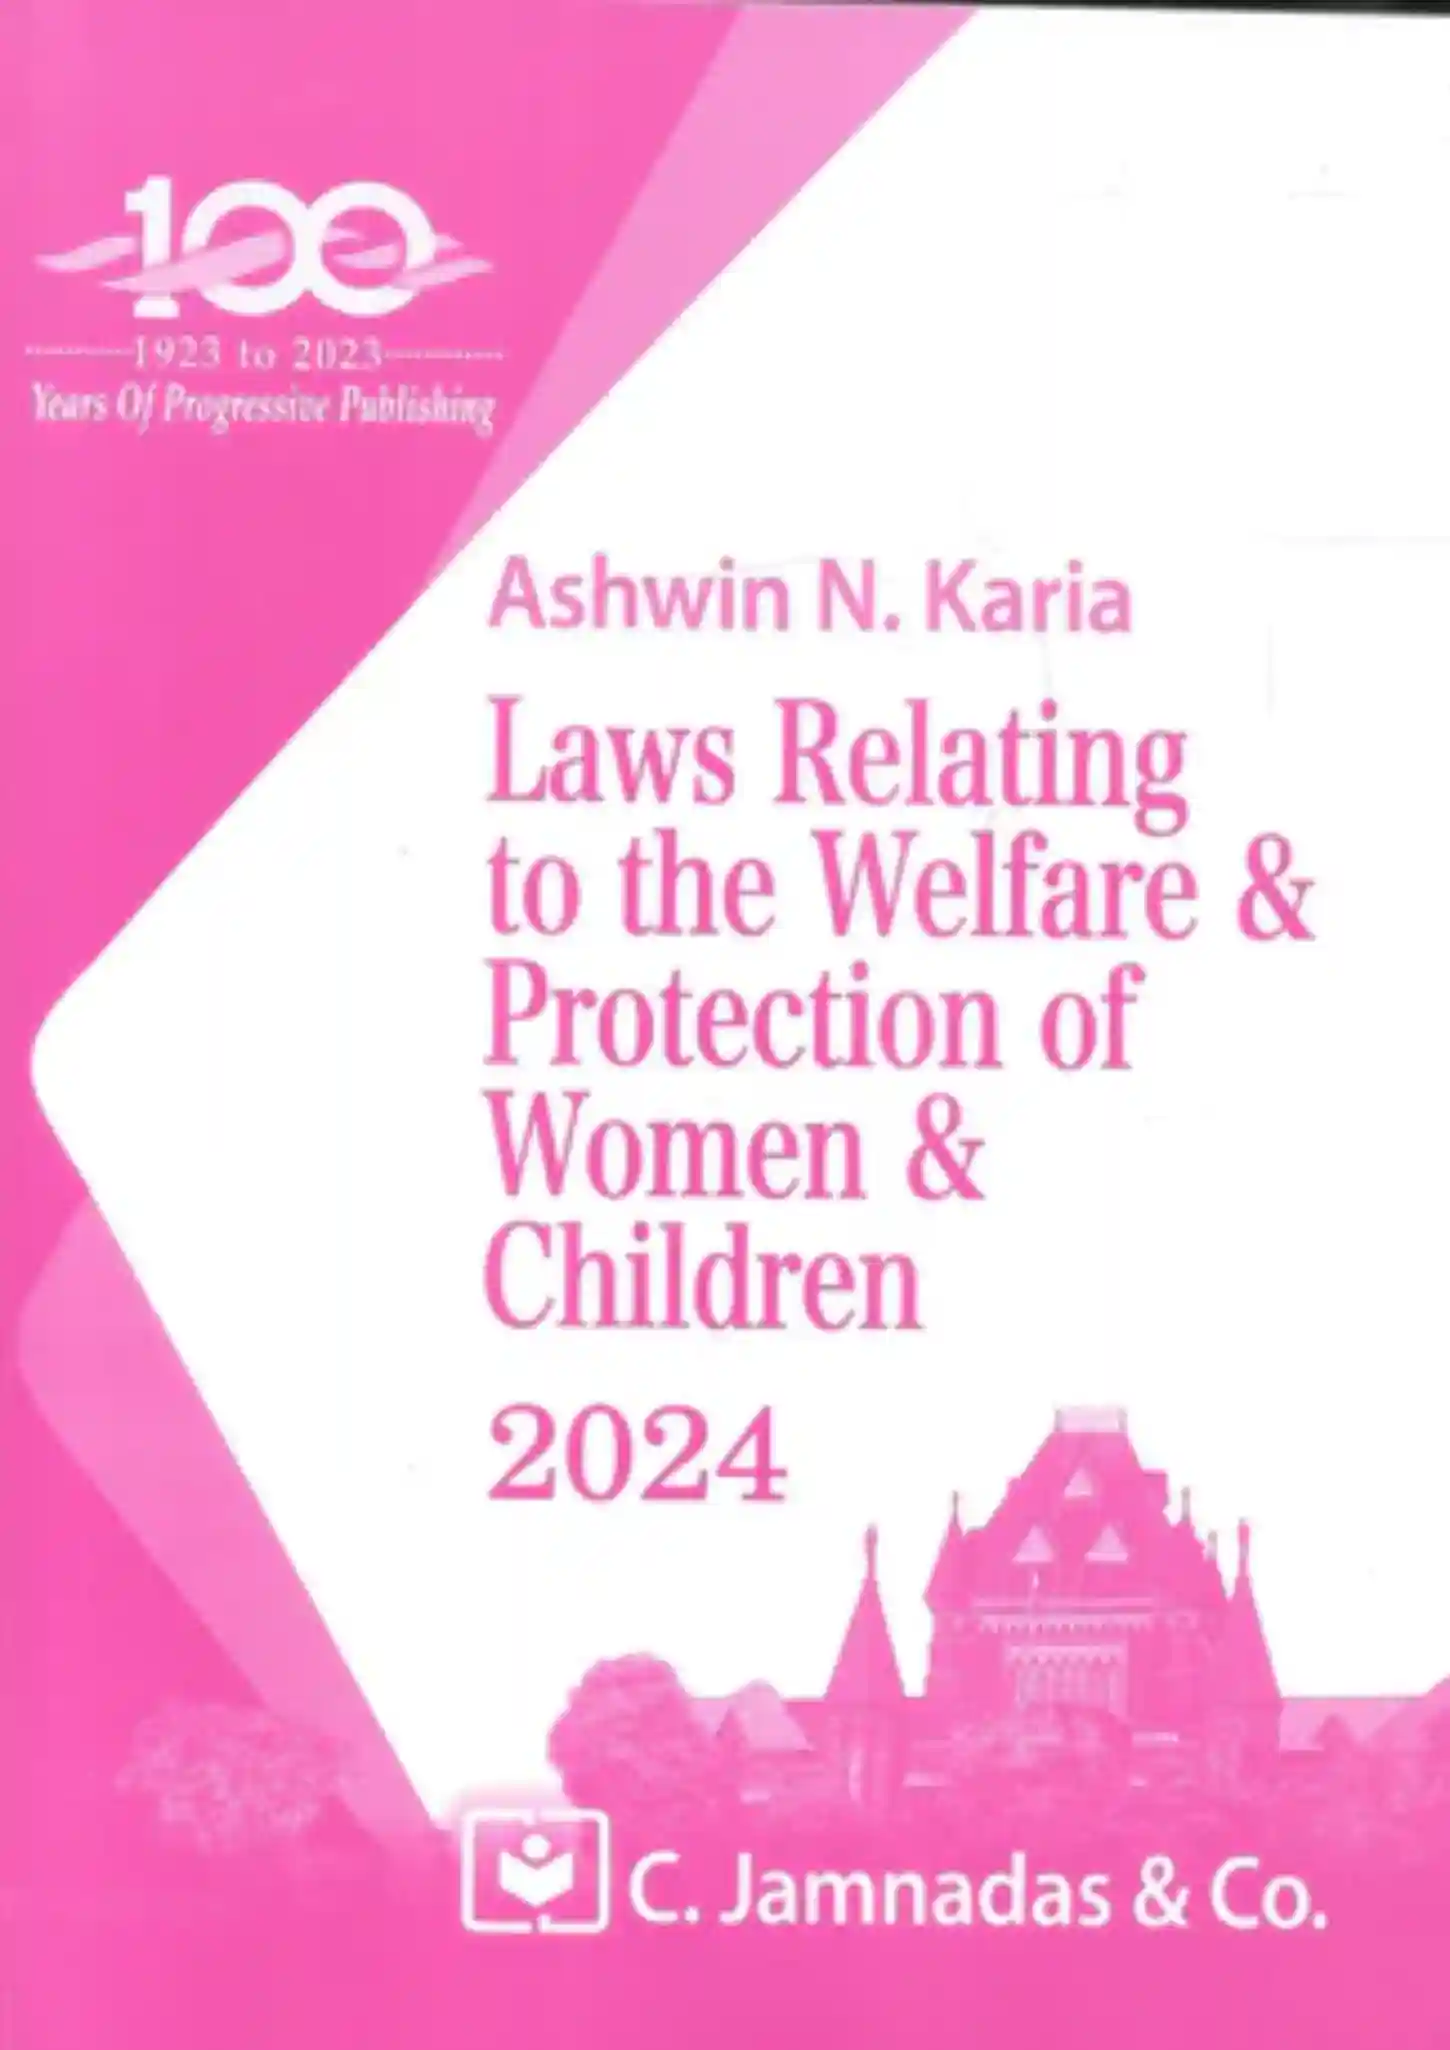  Laws Relating to the Welfare & Protection of Women & Children 2024